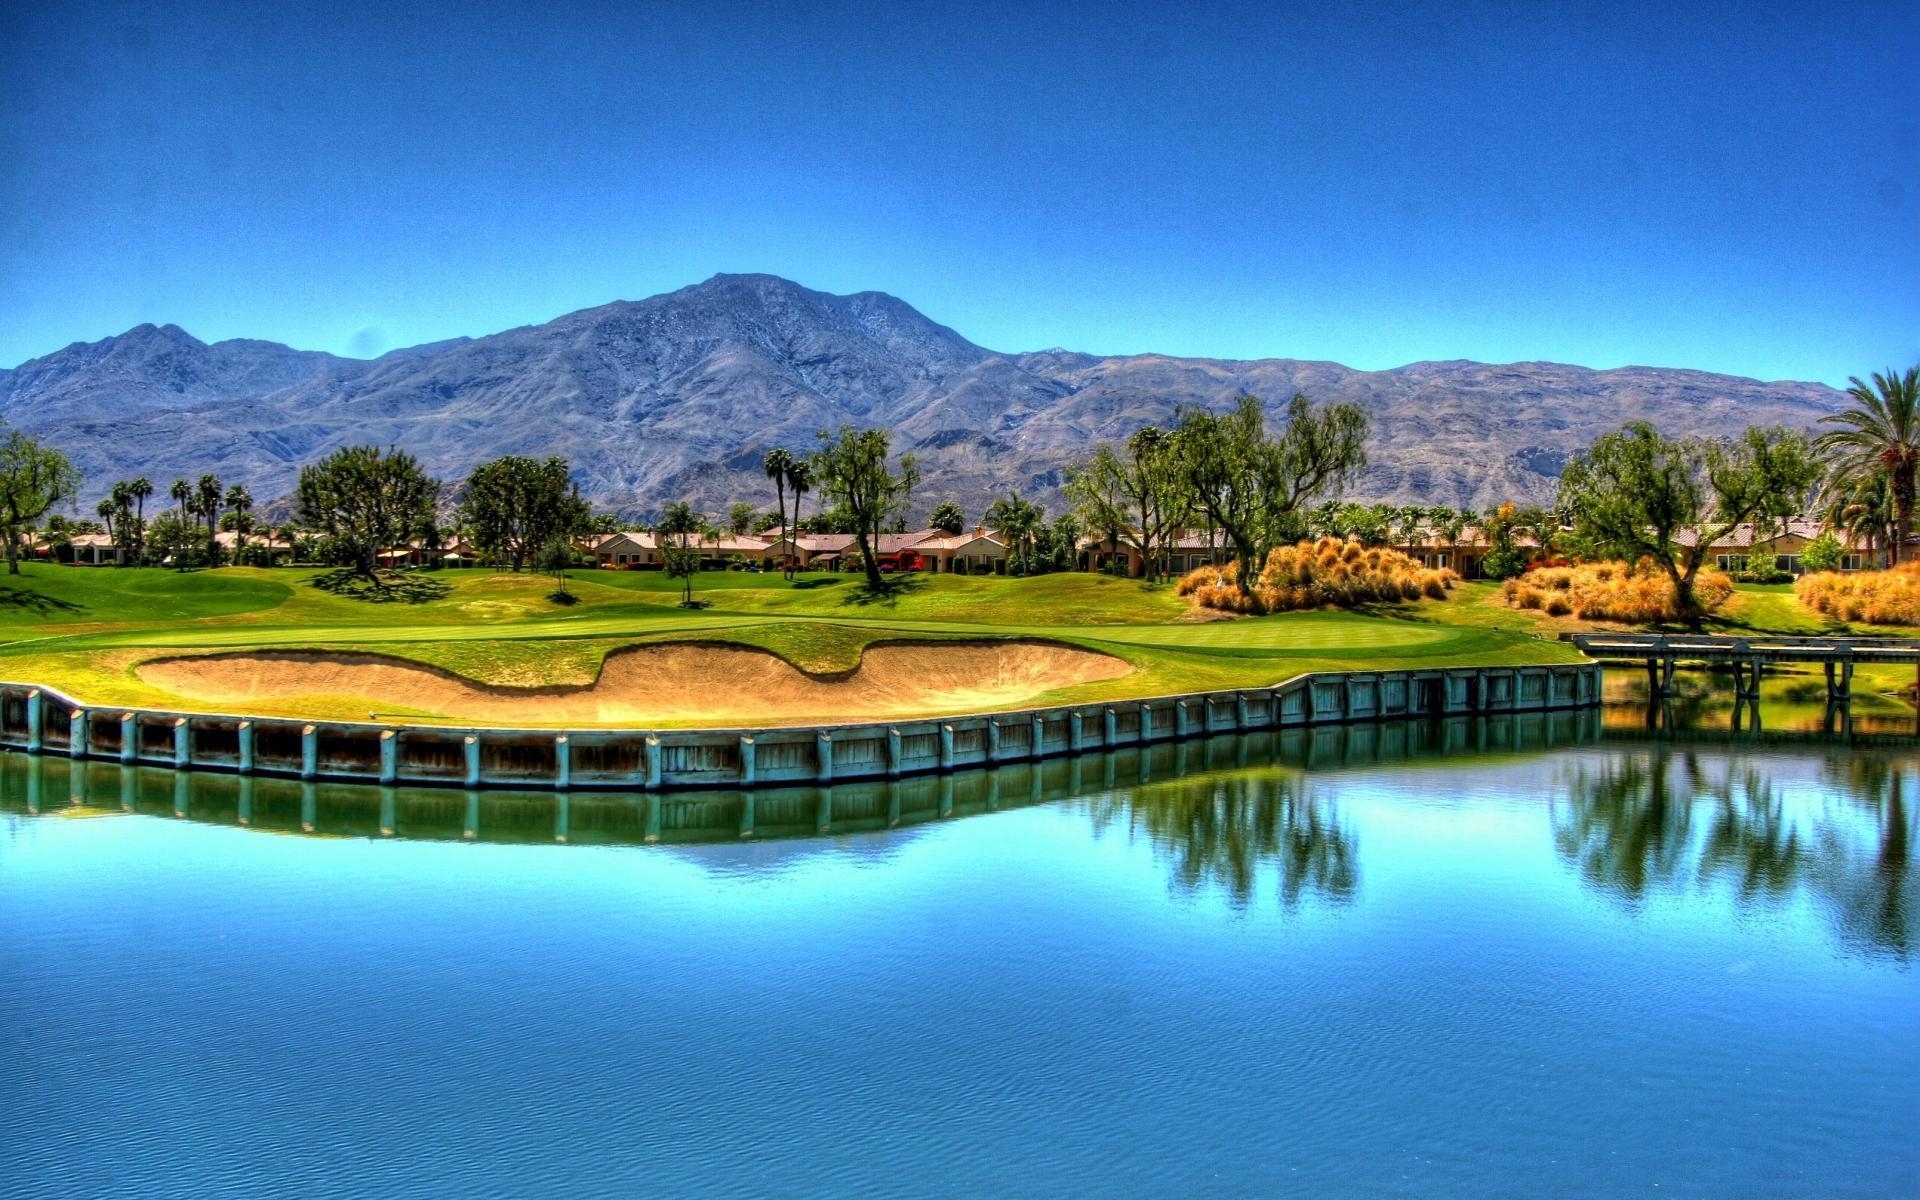 10 New Golf Course Desktop Wallpapers FULL HD 1080p For PC Background